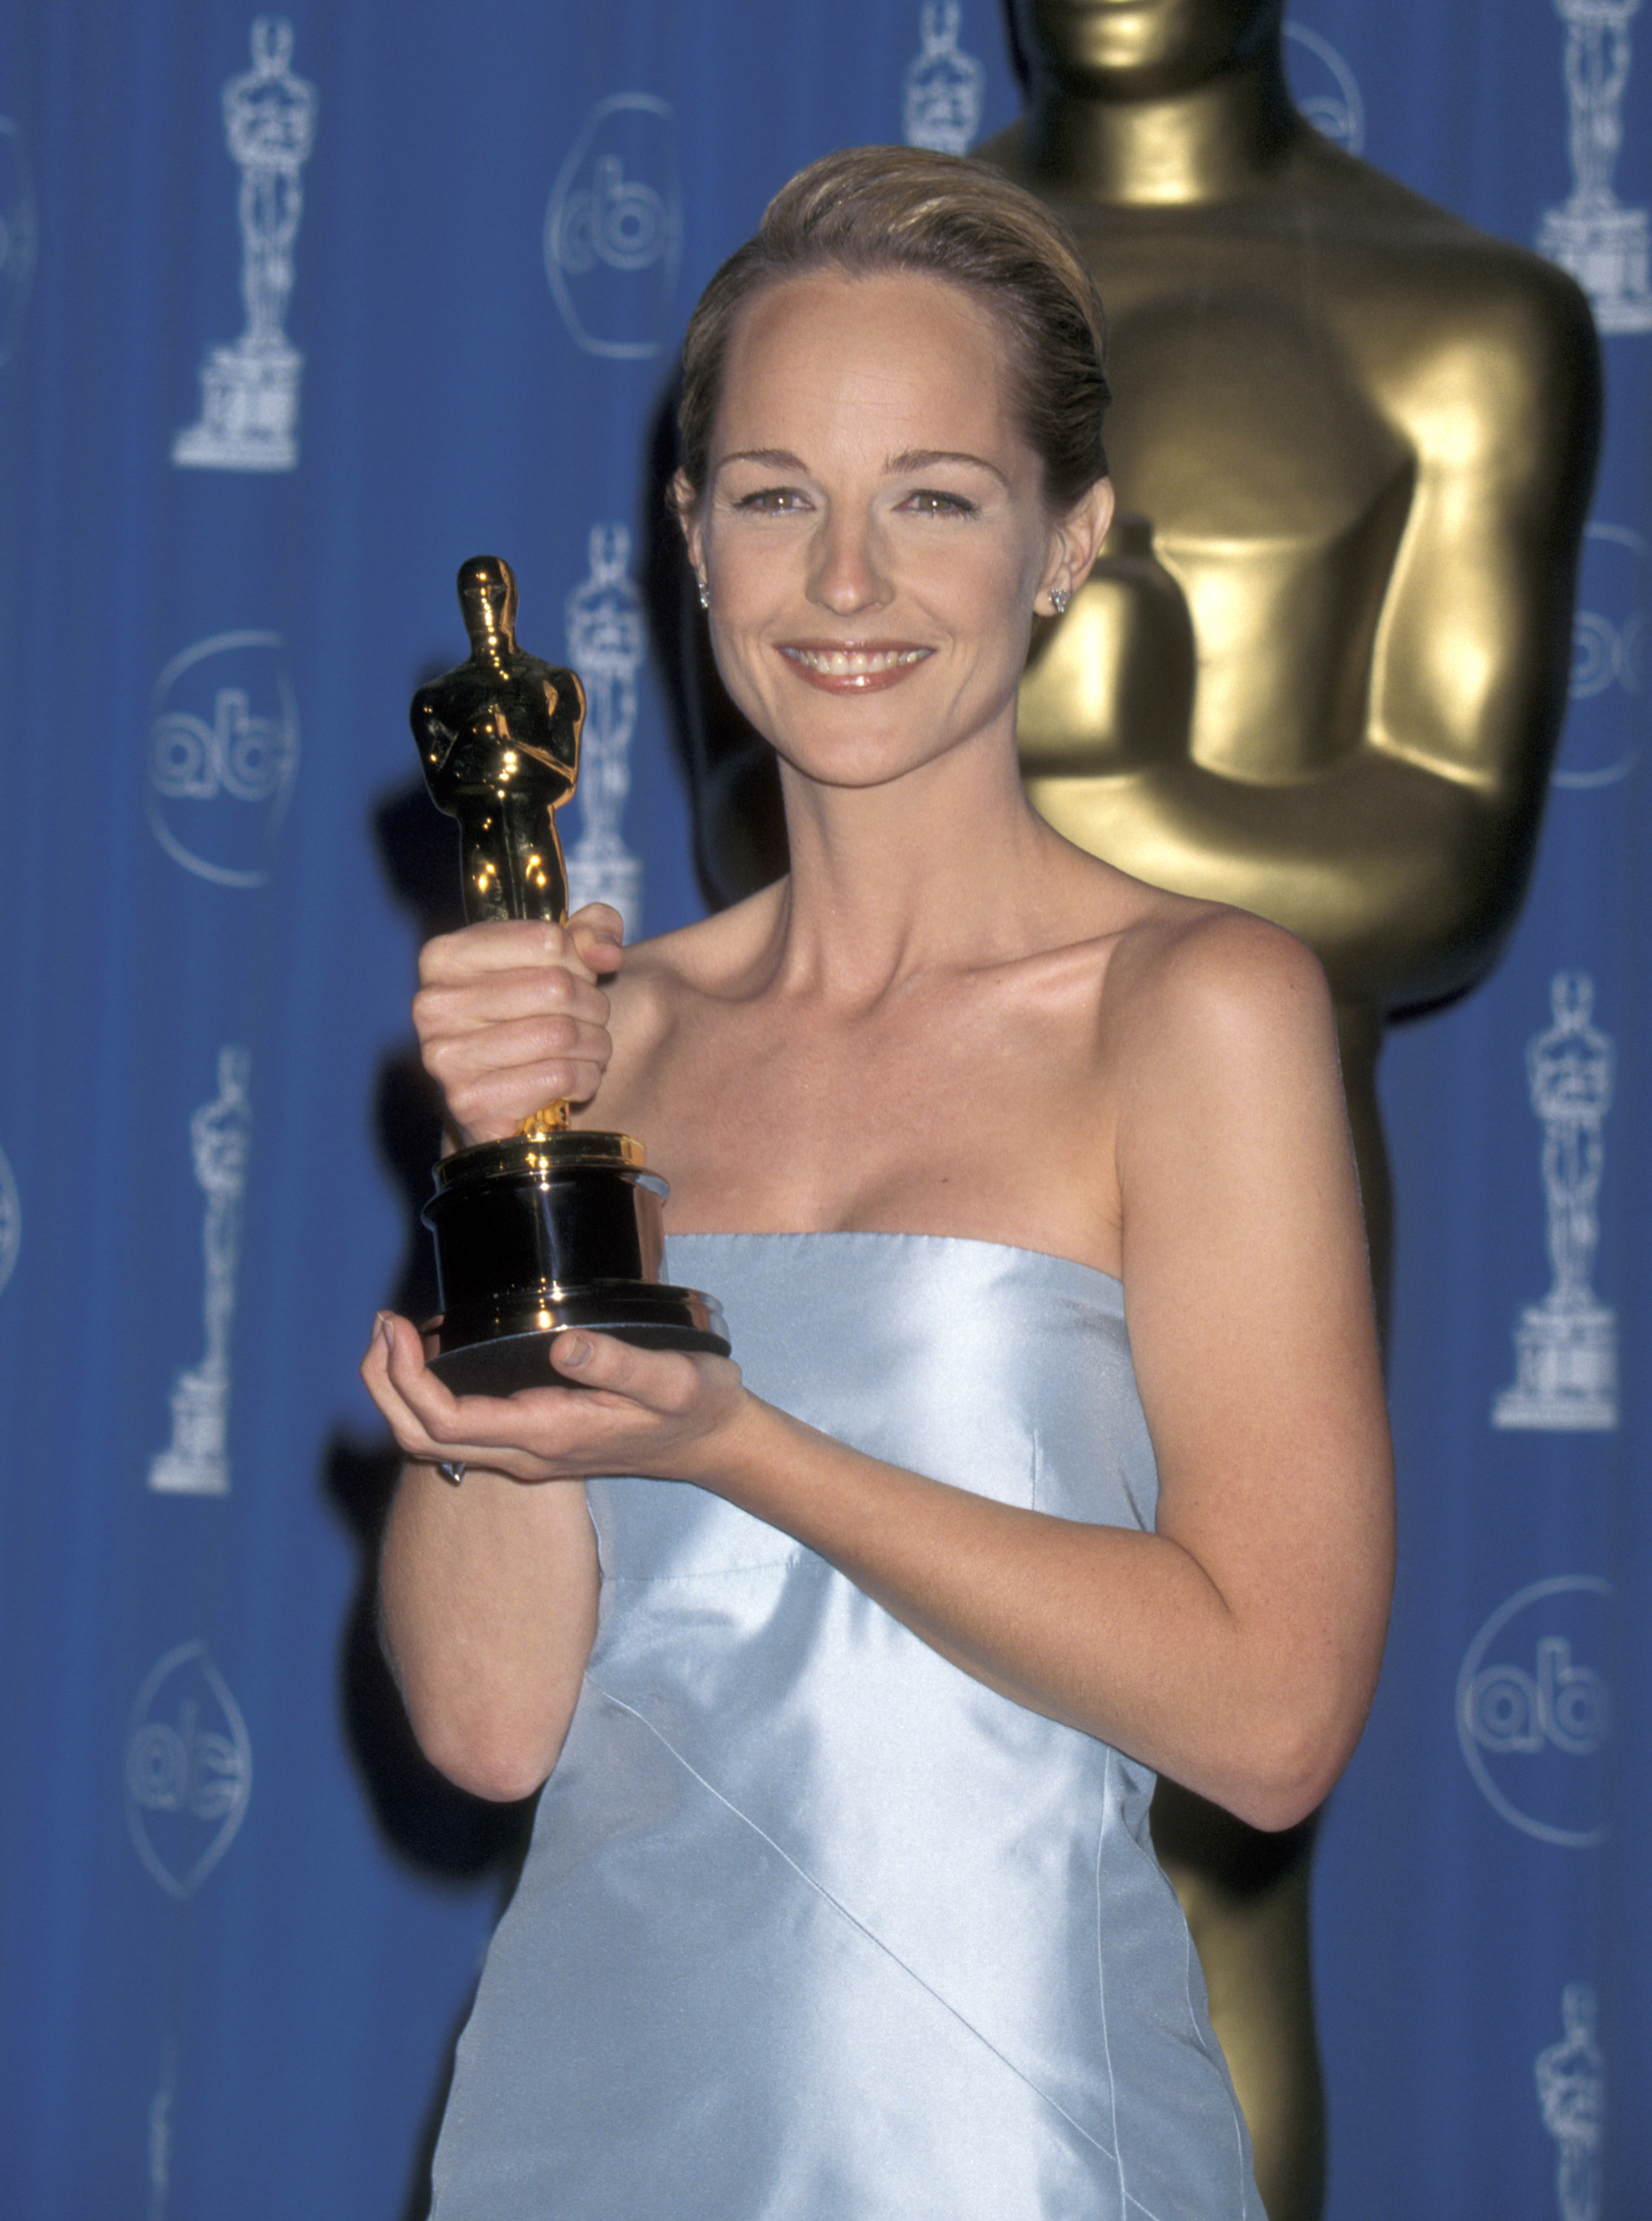 Helen Hunt holding her Oscar for Best Actress for the film "As Good As It Gets" at the 70th Academy Awards press room in March 1998 | Source: Getty Images